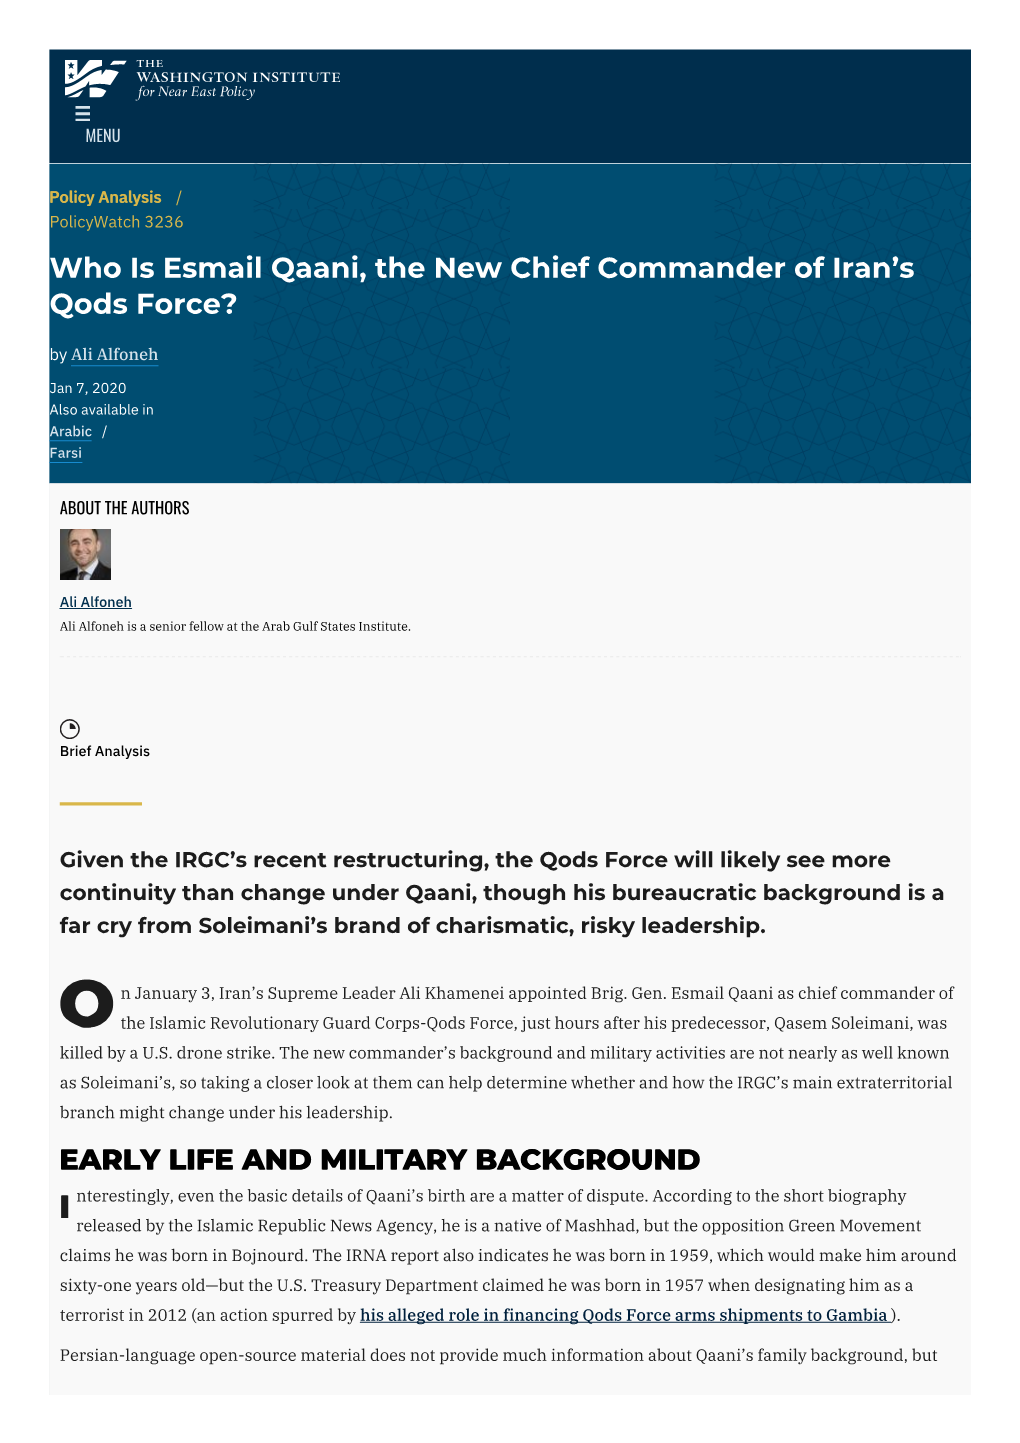 Who Is Esmail Qaani, the New Chief Commander of Iran’S Qods Force? by Ali Alfoneh